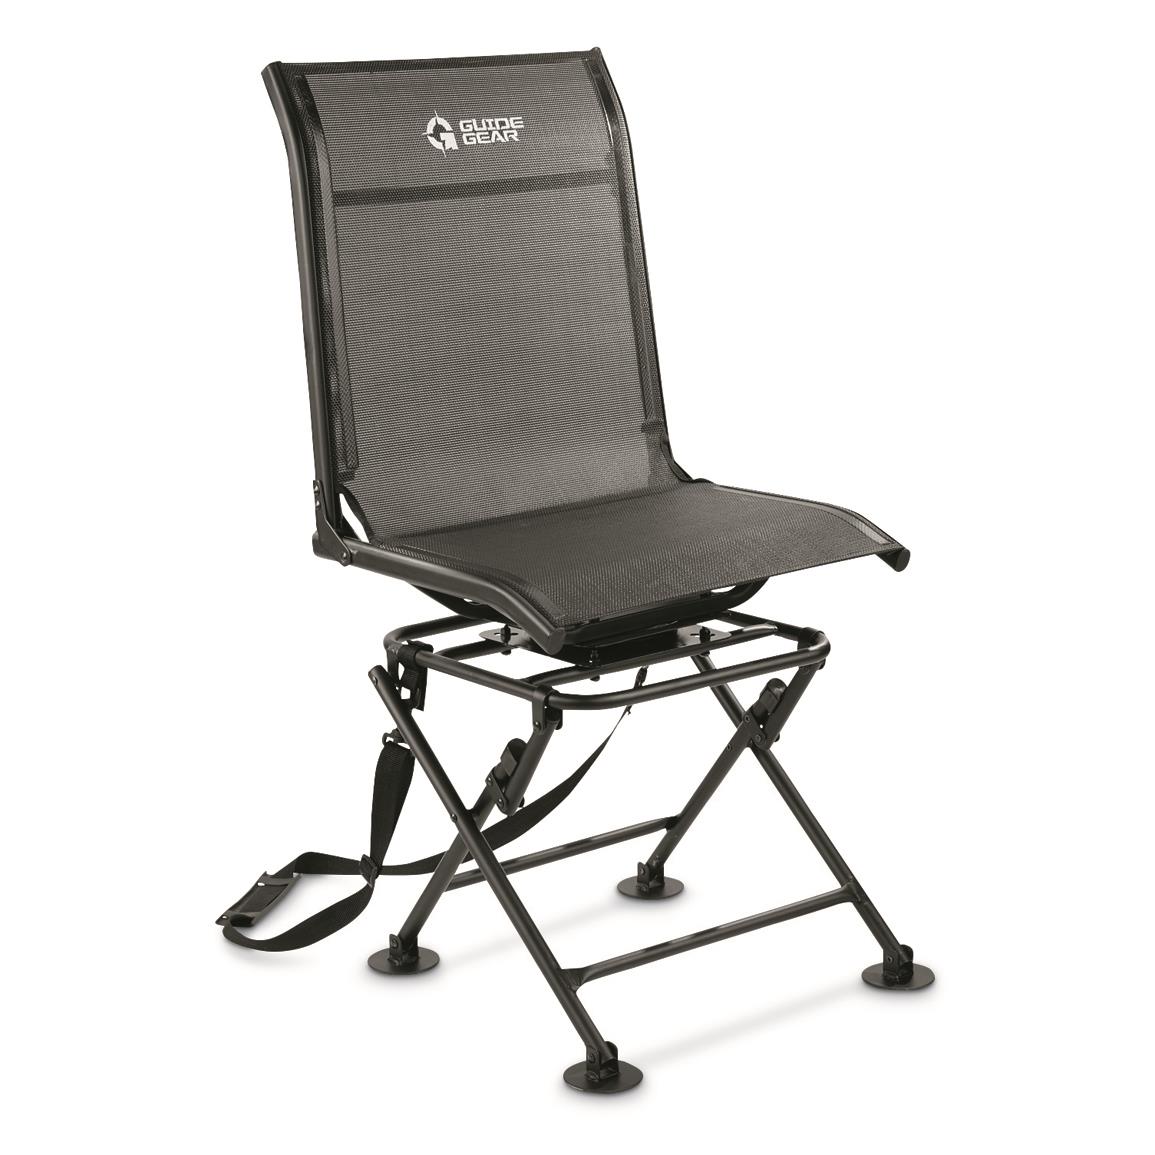 300-lb Capacity Guide Gear 360 Degree Swivel Blind Hunting Chair 